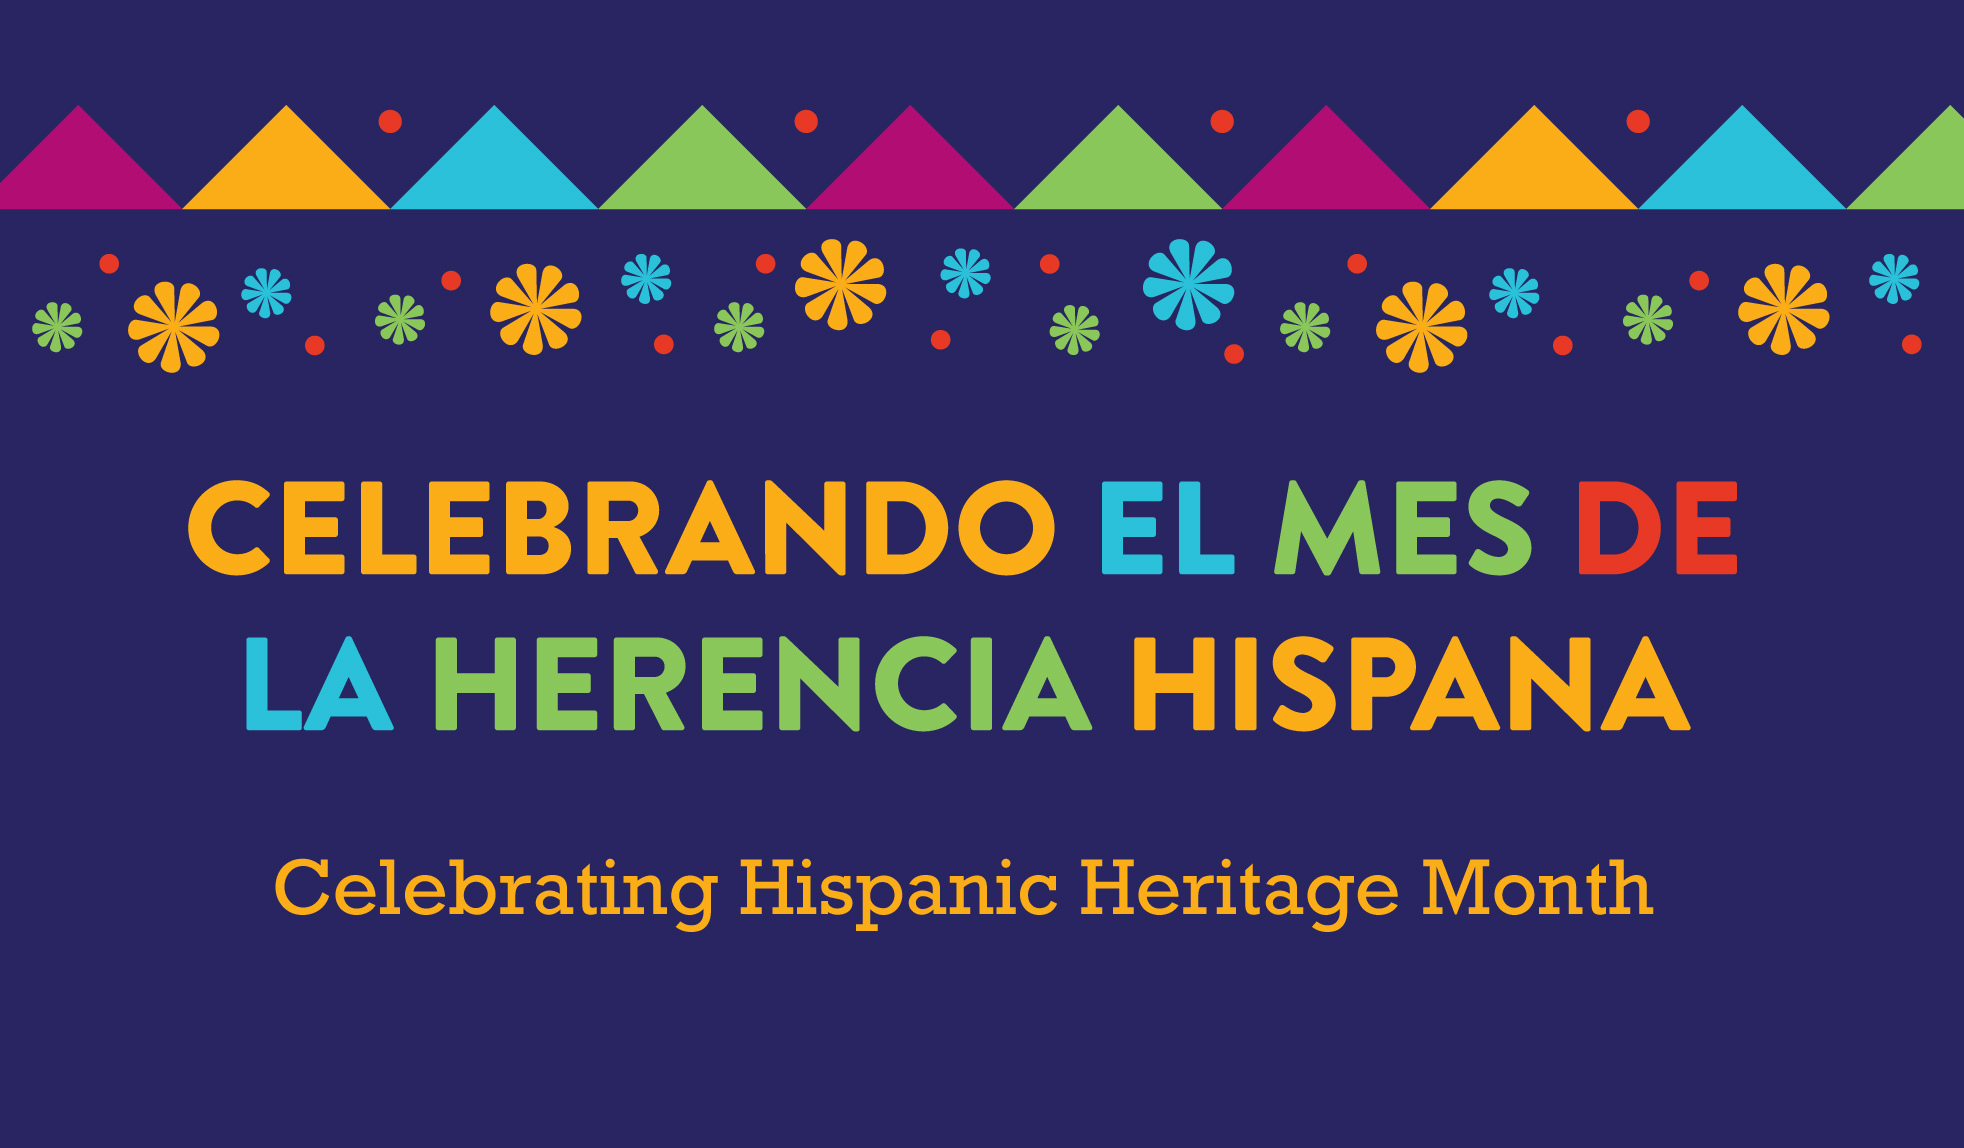 Help us recognize and honor the contributions of Hispanic communities and individuals to our nation and culture.